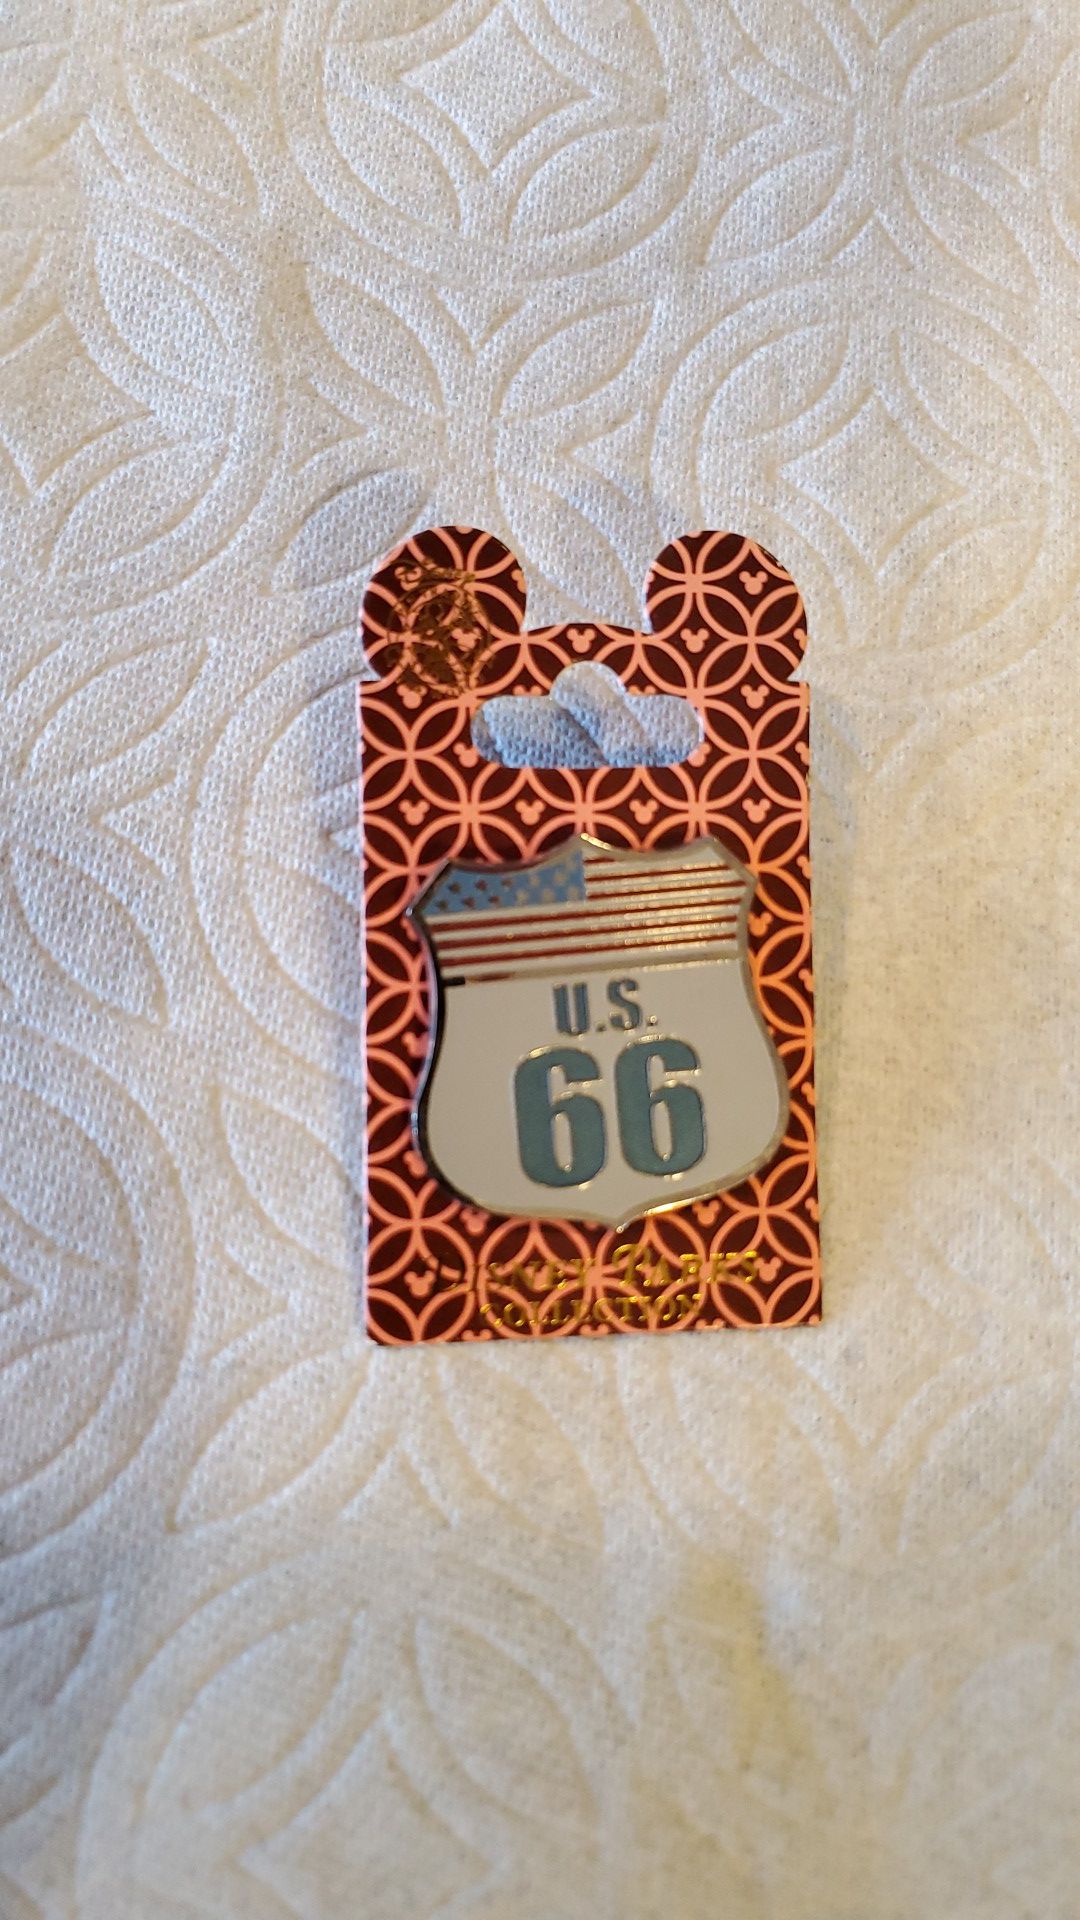 Vintage Disney Route 66 pin still on card